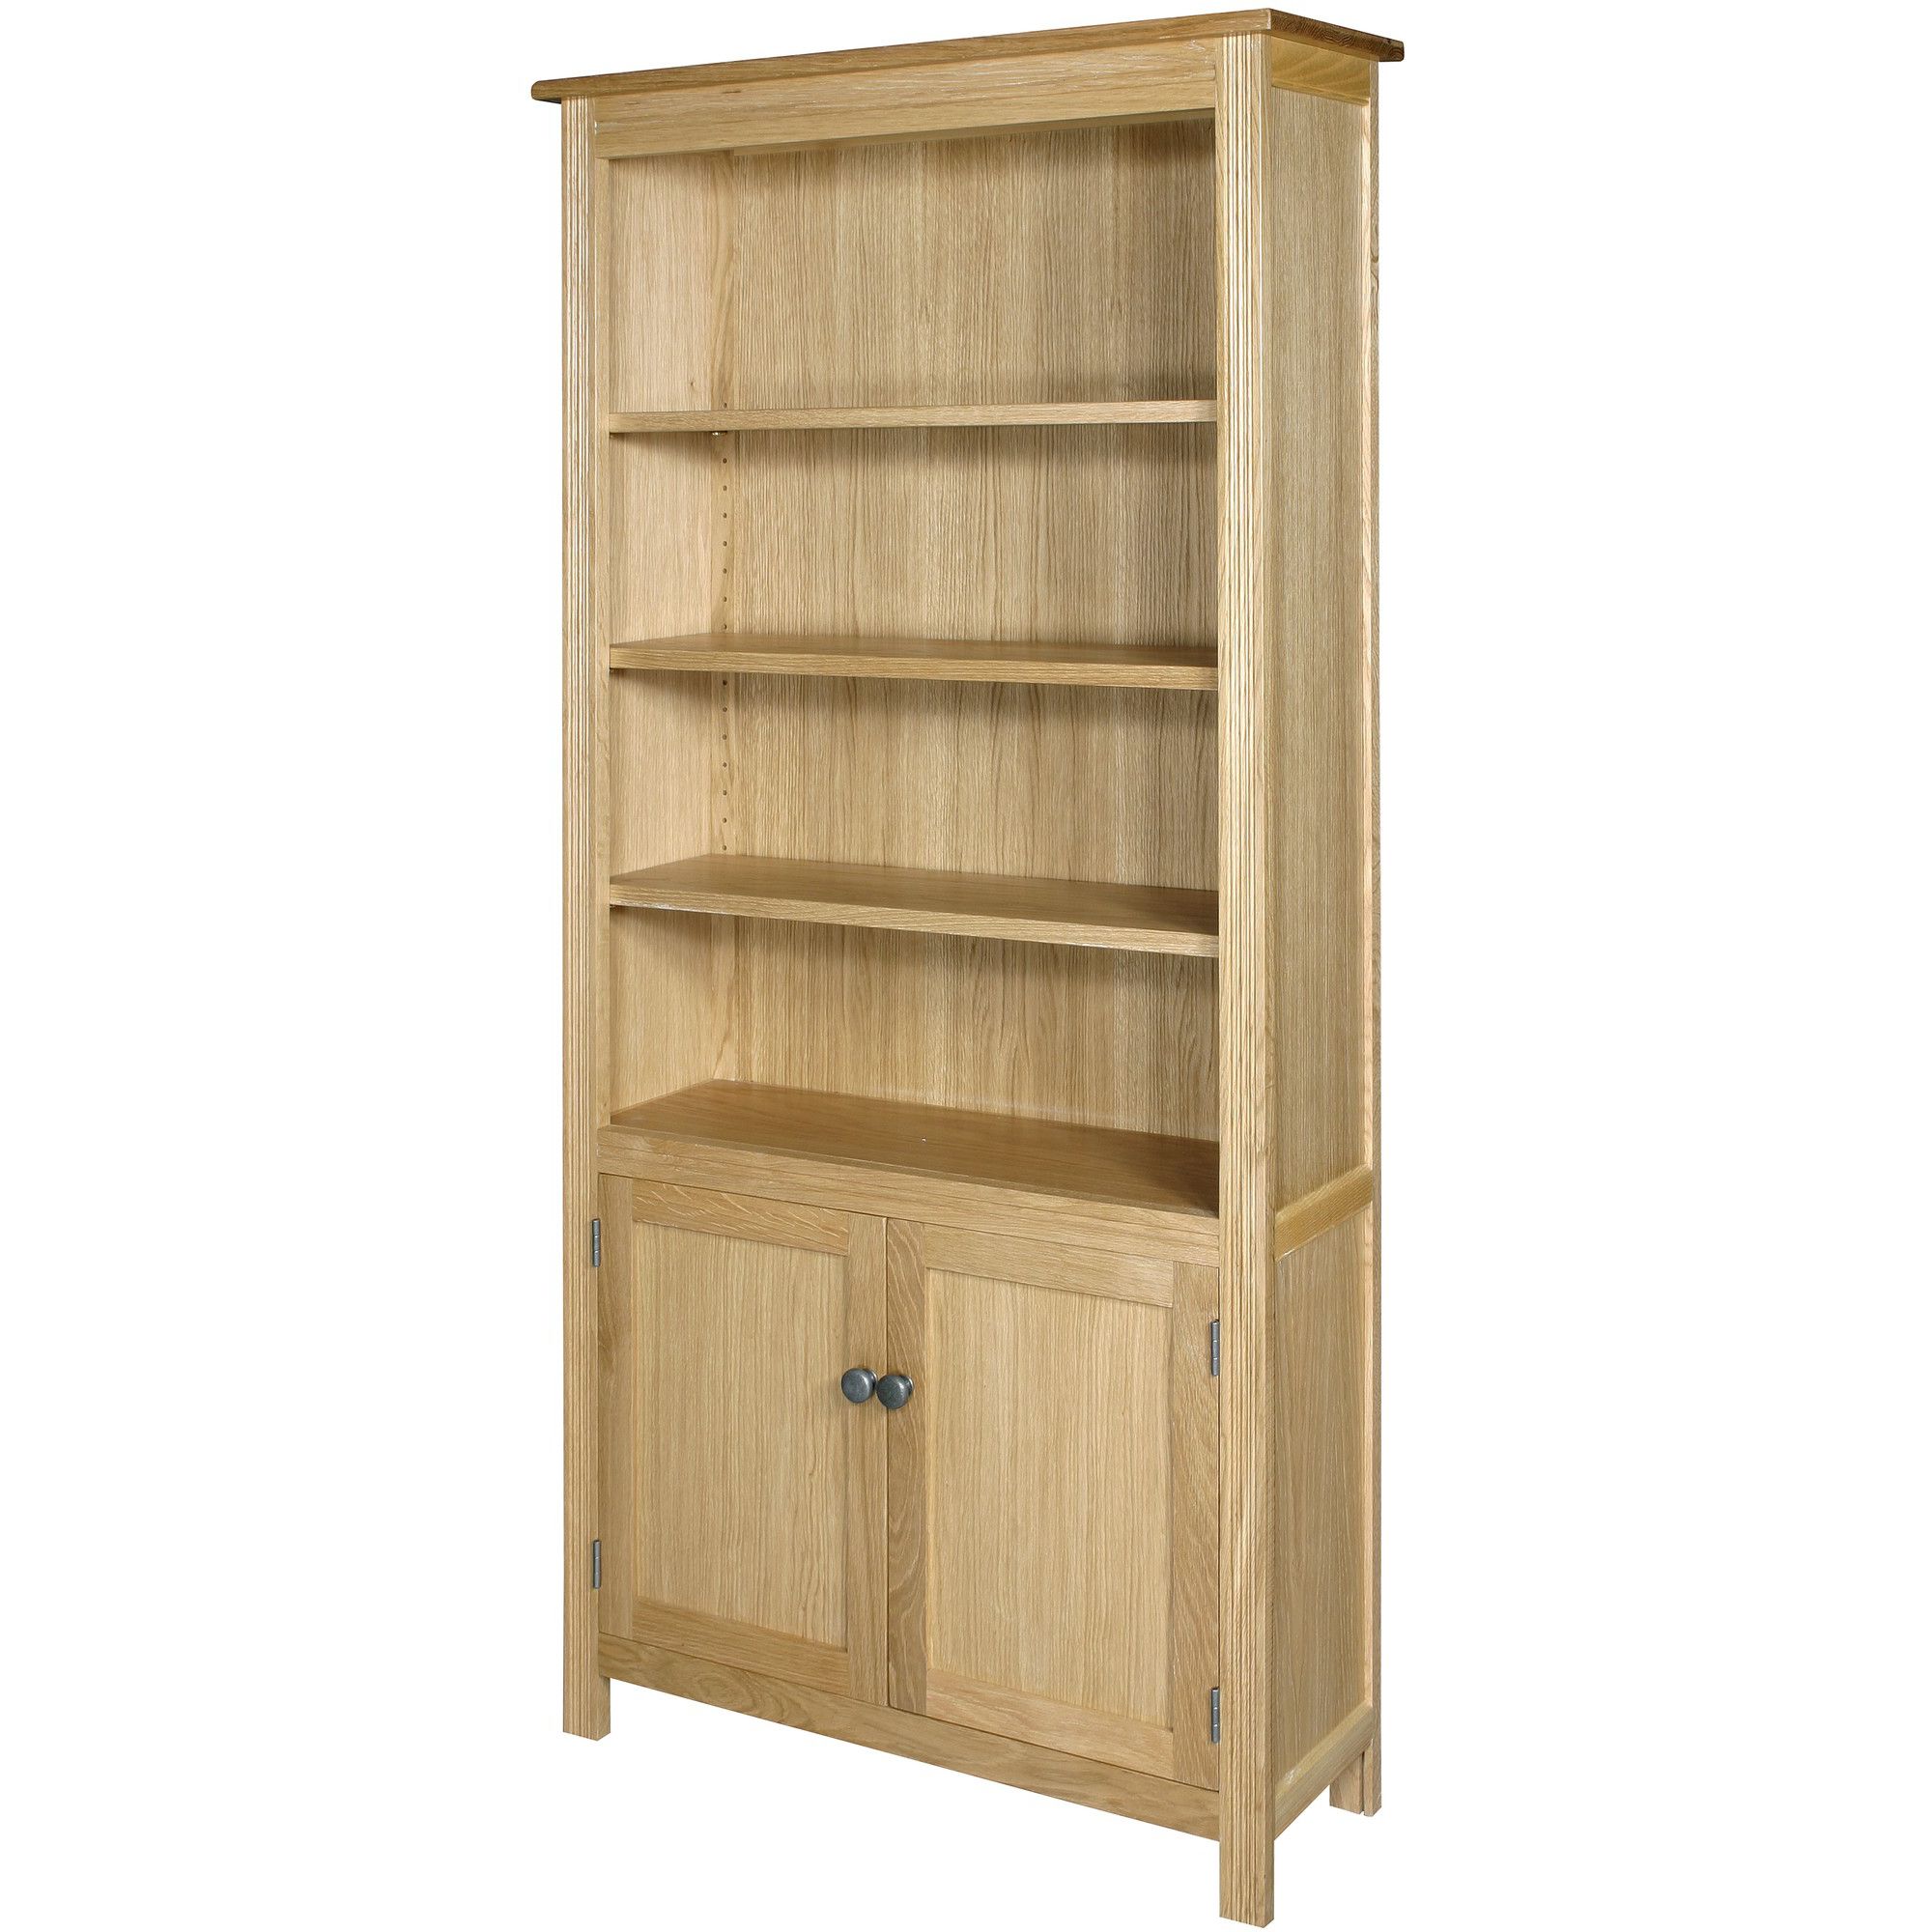 Old Charm Hertford Bookcase with Doors - Natural at Tesco Direct